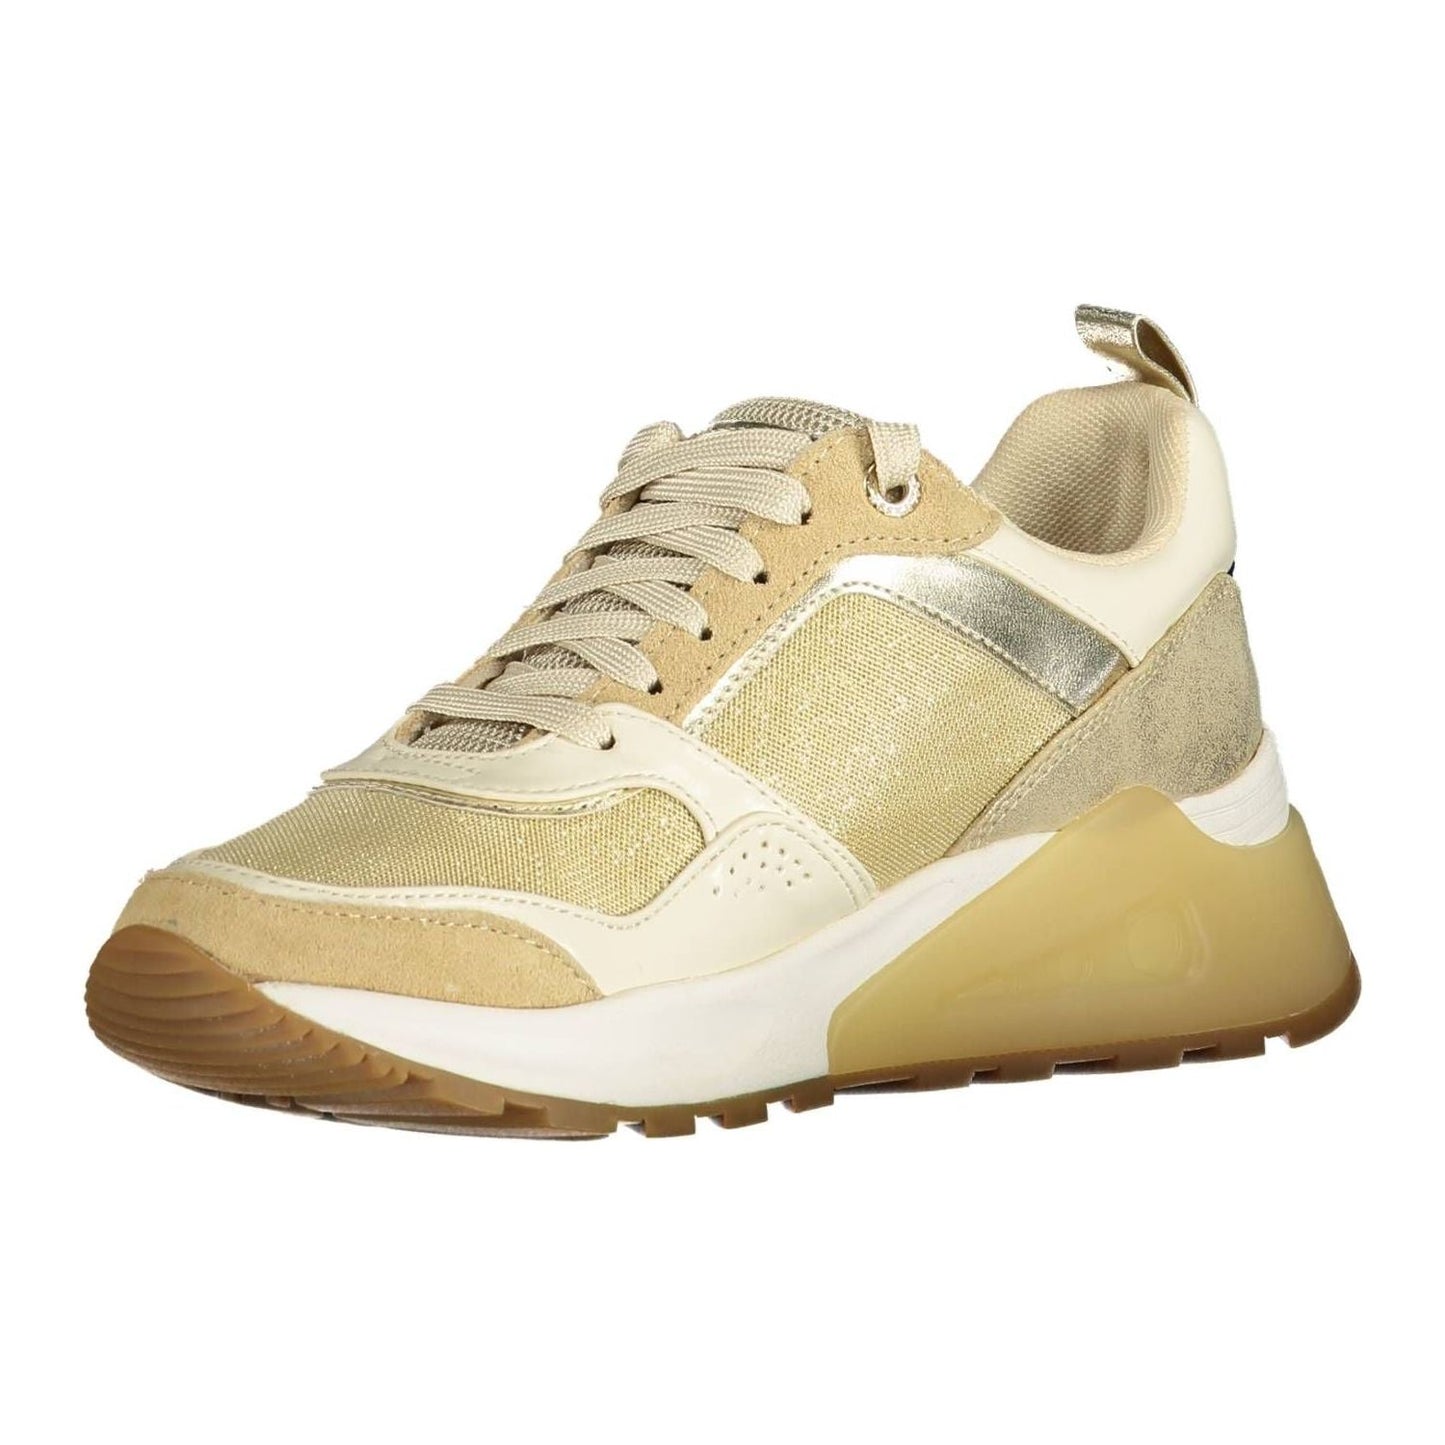 U.S. POLO ASSN.Elegant Gold-Tone Sports Sneakers with LacesMcRichard Designer Brands£119.00